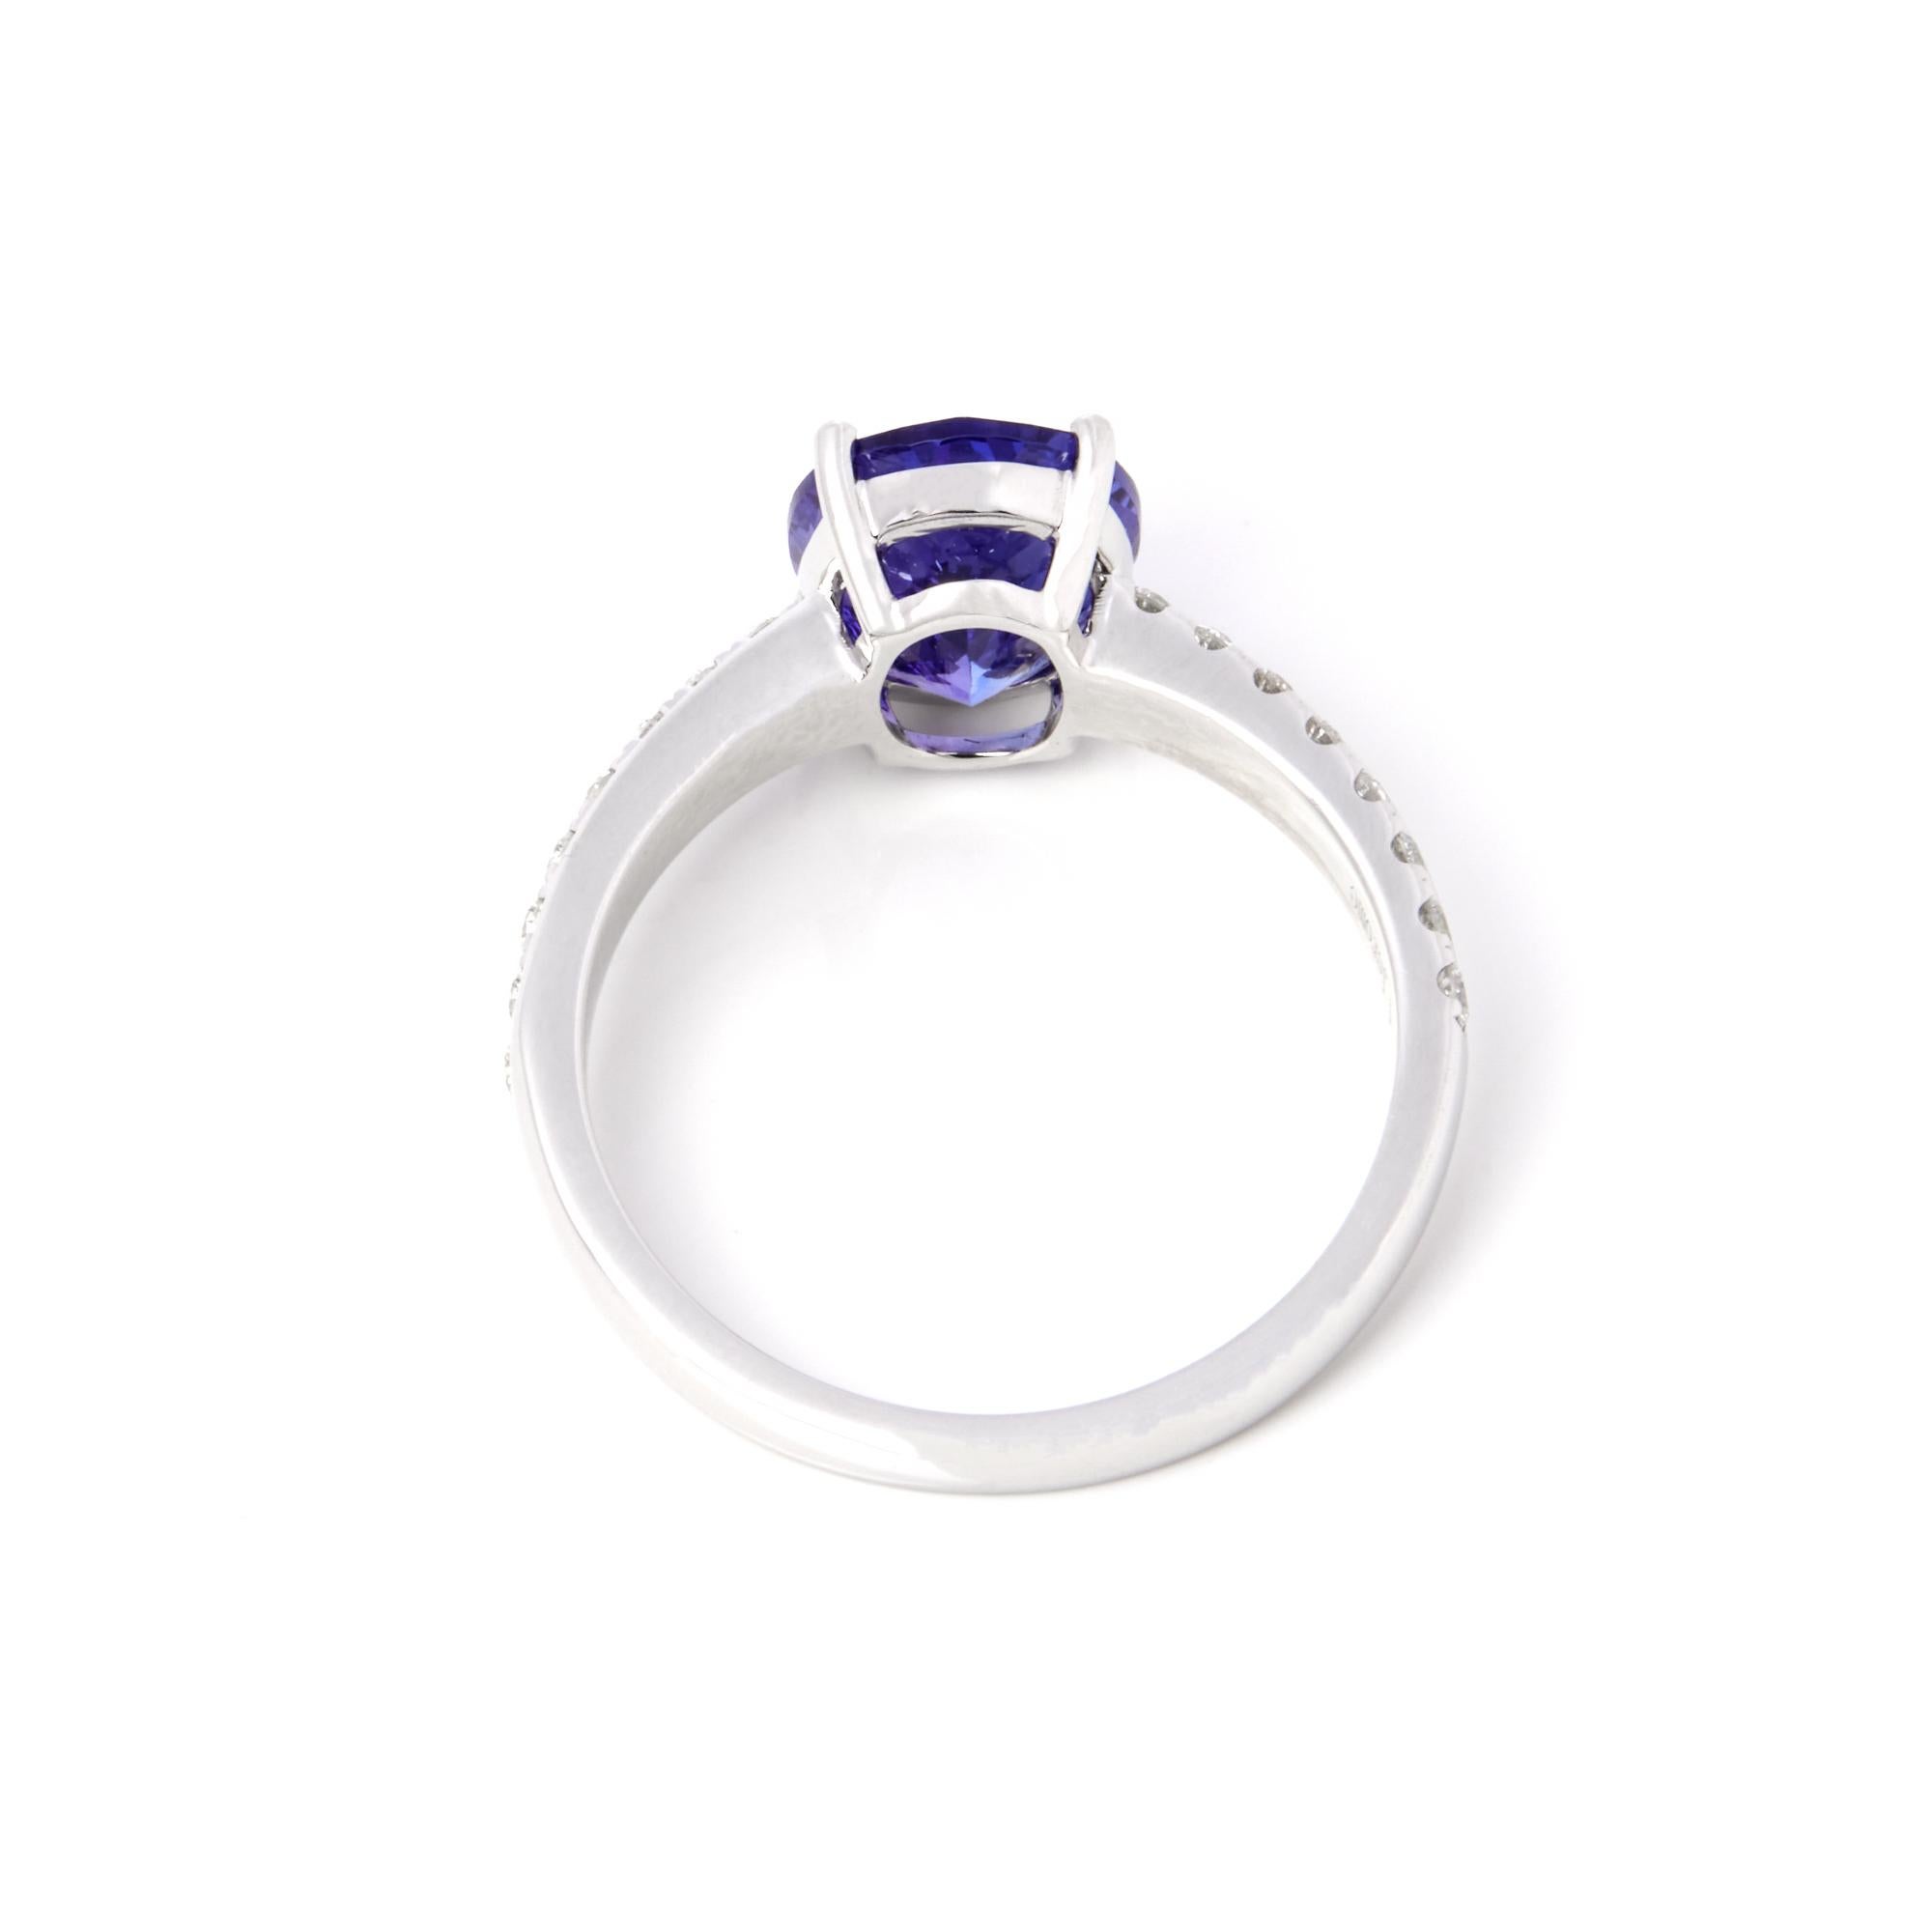 David Jerome Certified 2.58ct Oval Cut Tanzanite and Diamond Ring In New Condition For Sale In Bishop's Stortford, Hertfordshire